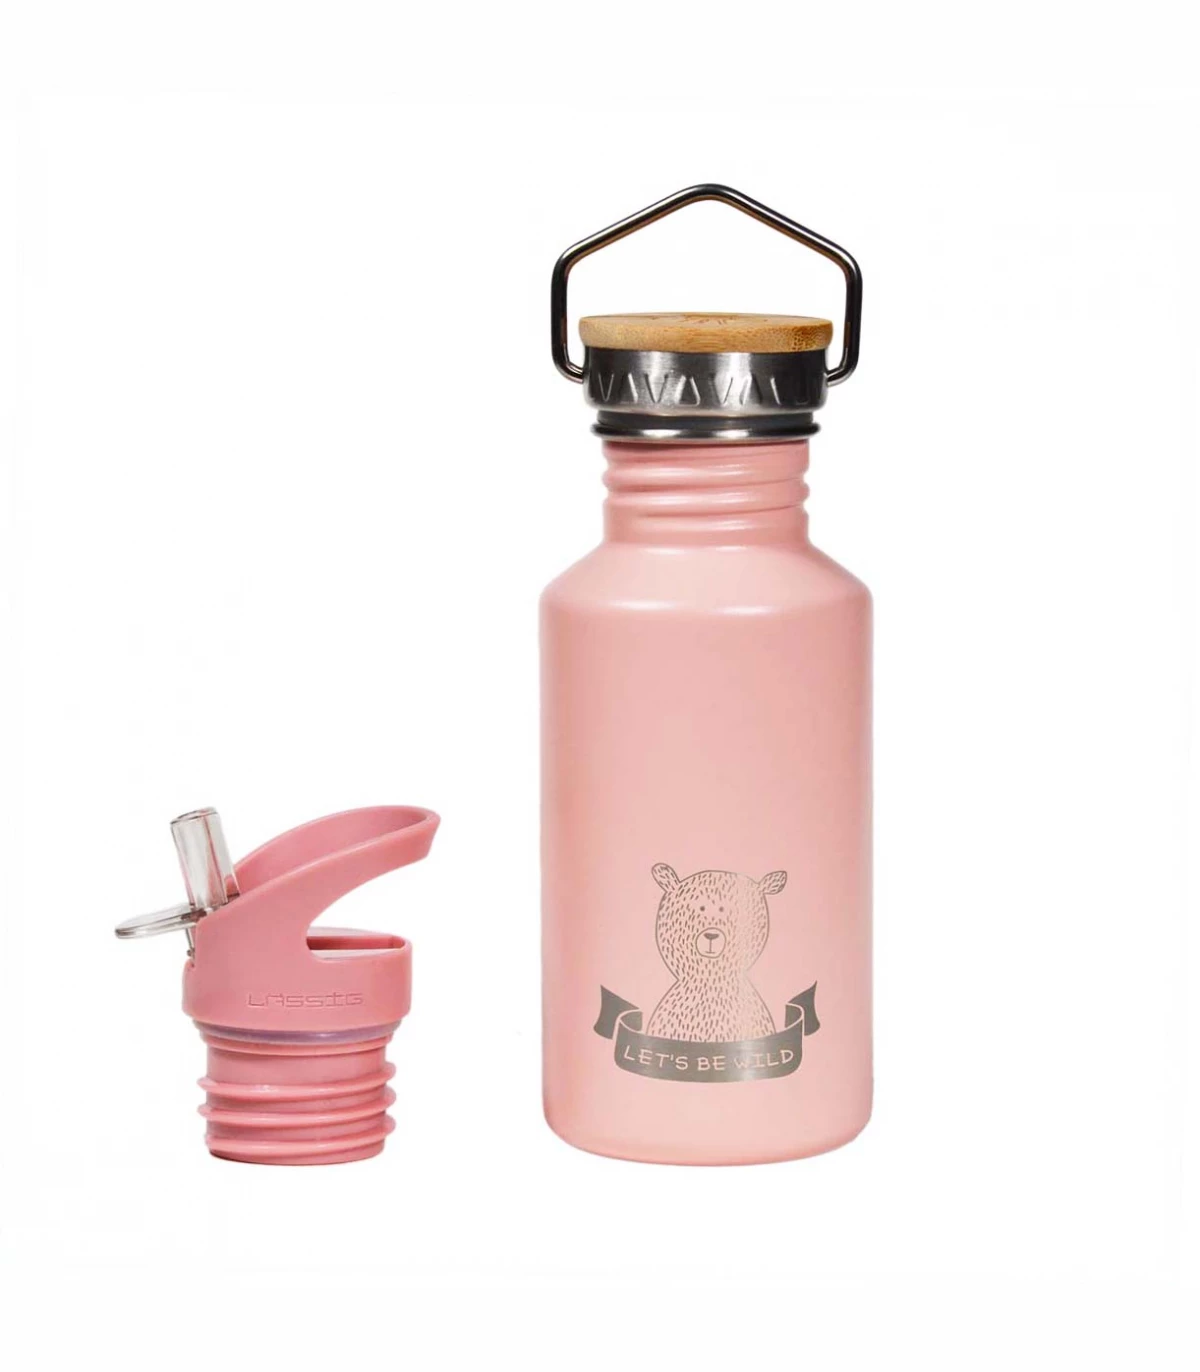 Stainless Steel Water Bottle for Kids - Adventure Rose